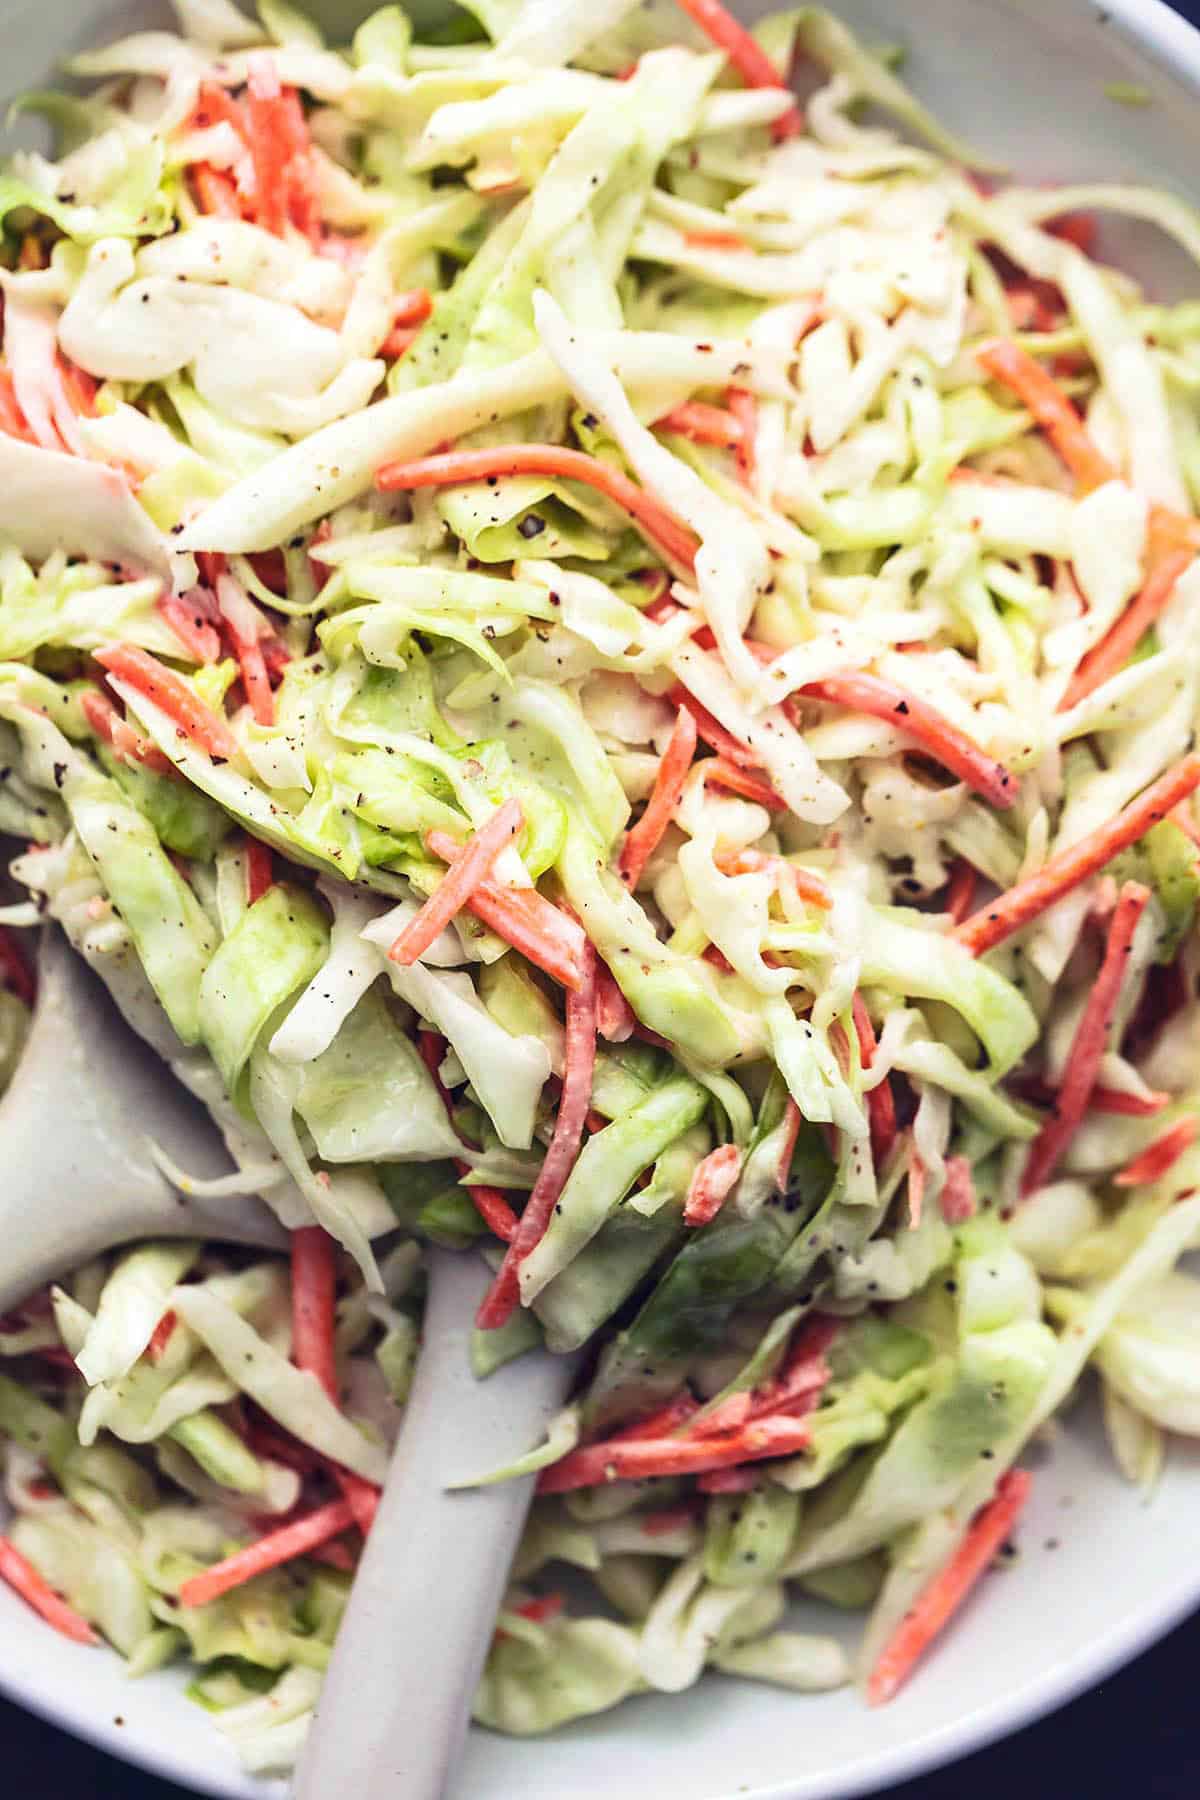 up close shredded cabbage and carrots tossed in creamy dressing